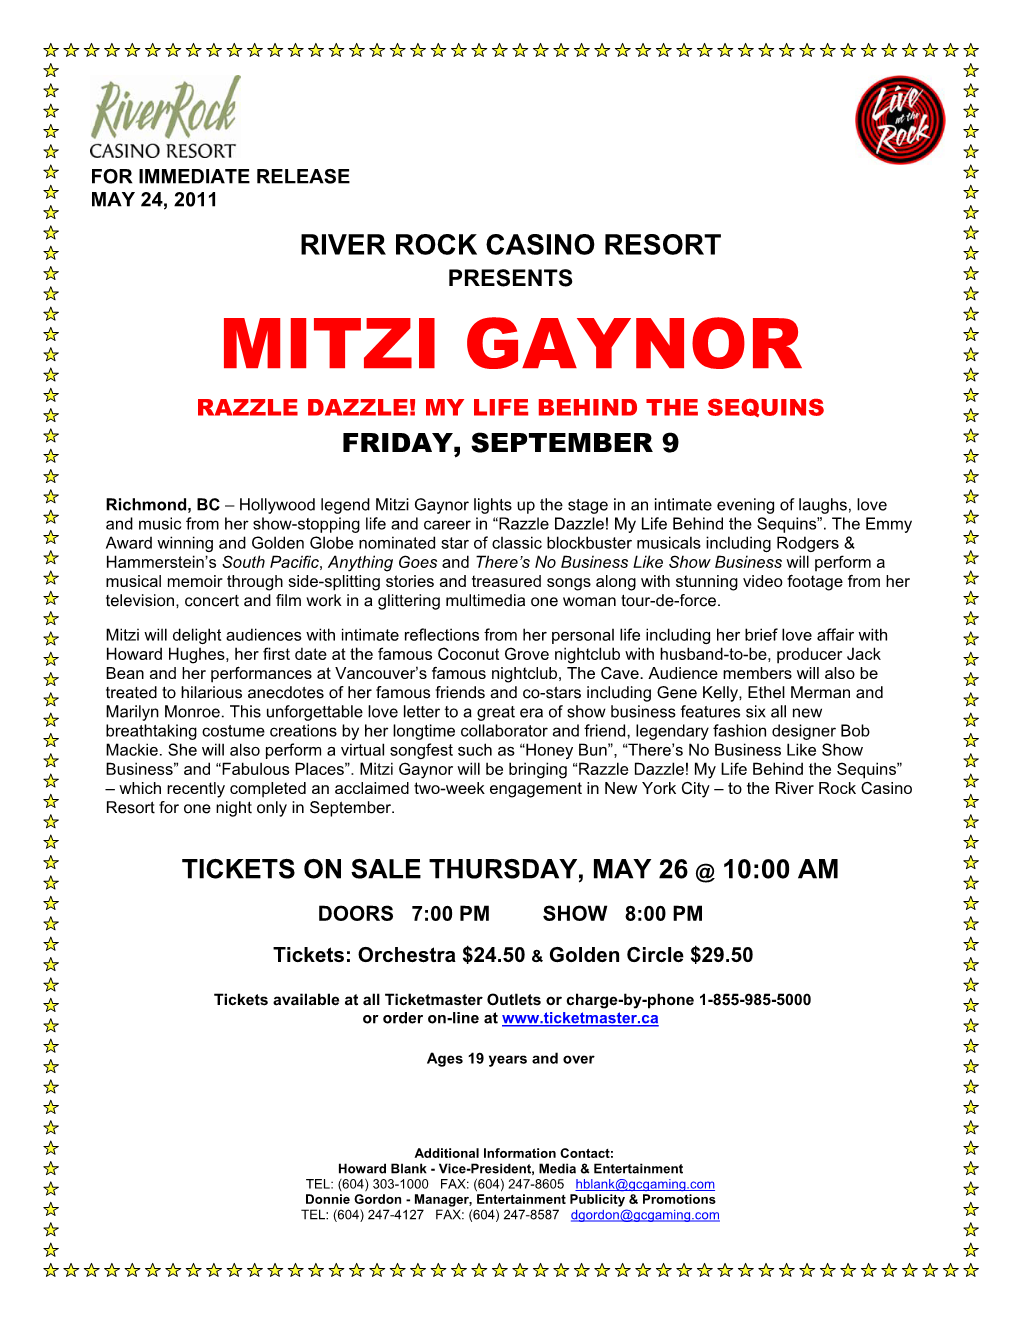 Mitzi Gaynor Razzle Dazzle! My Life Behind the Sequins Friday, September 9